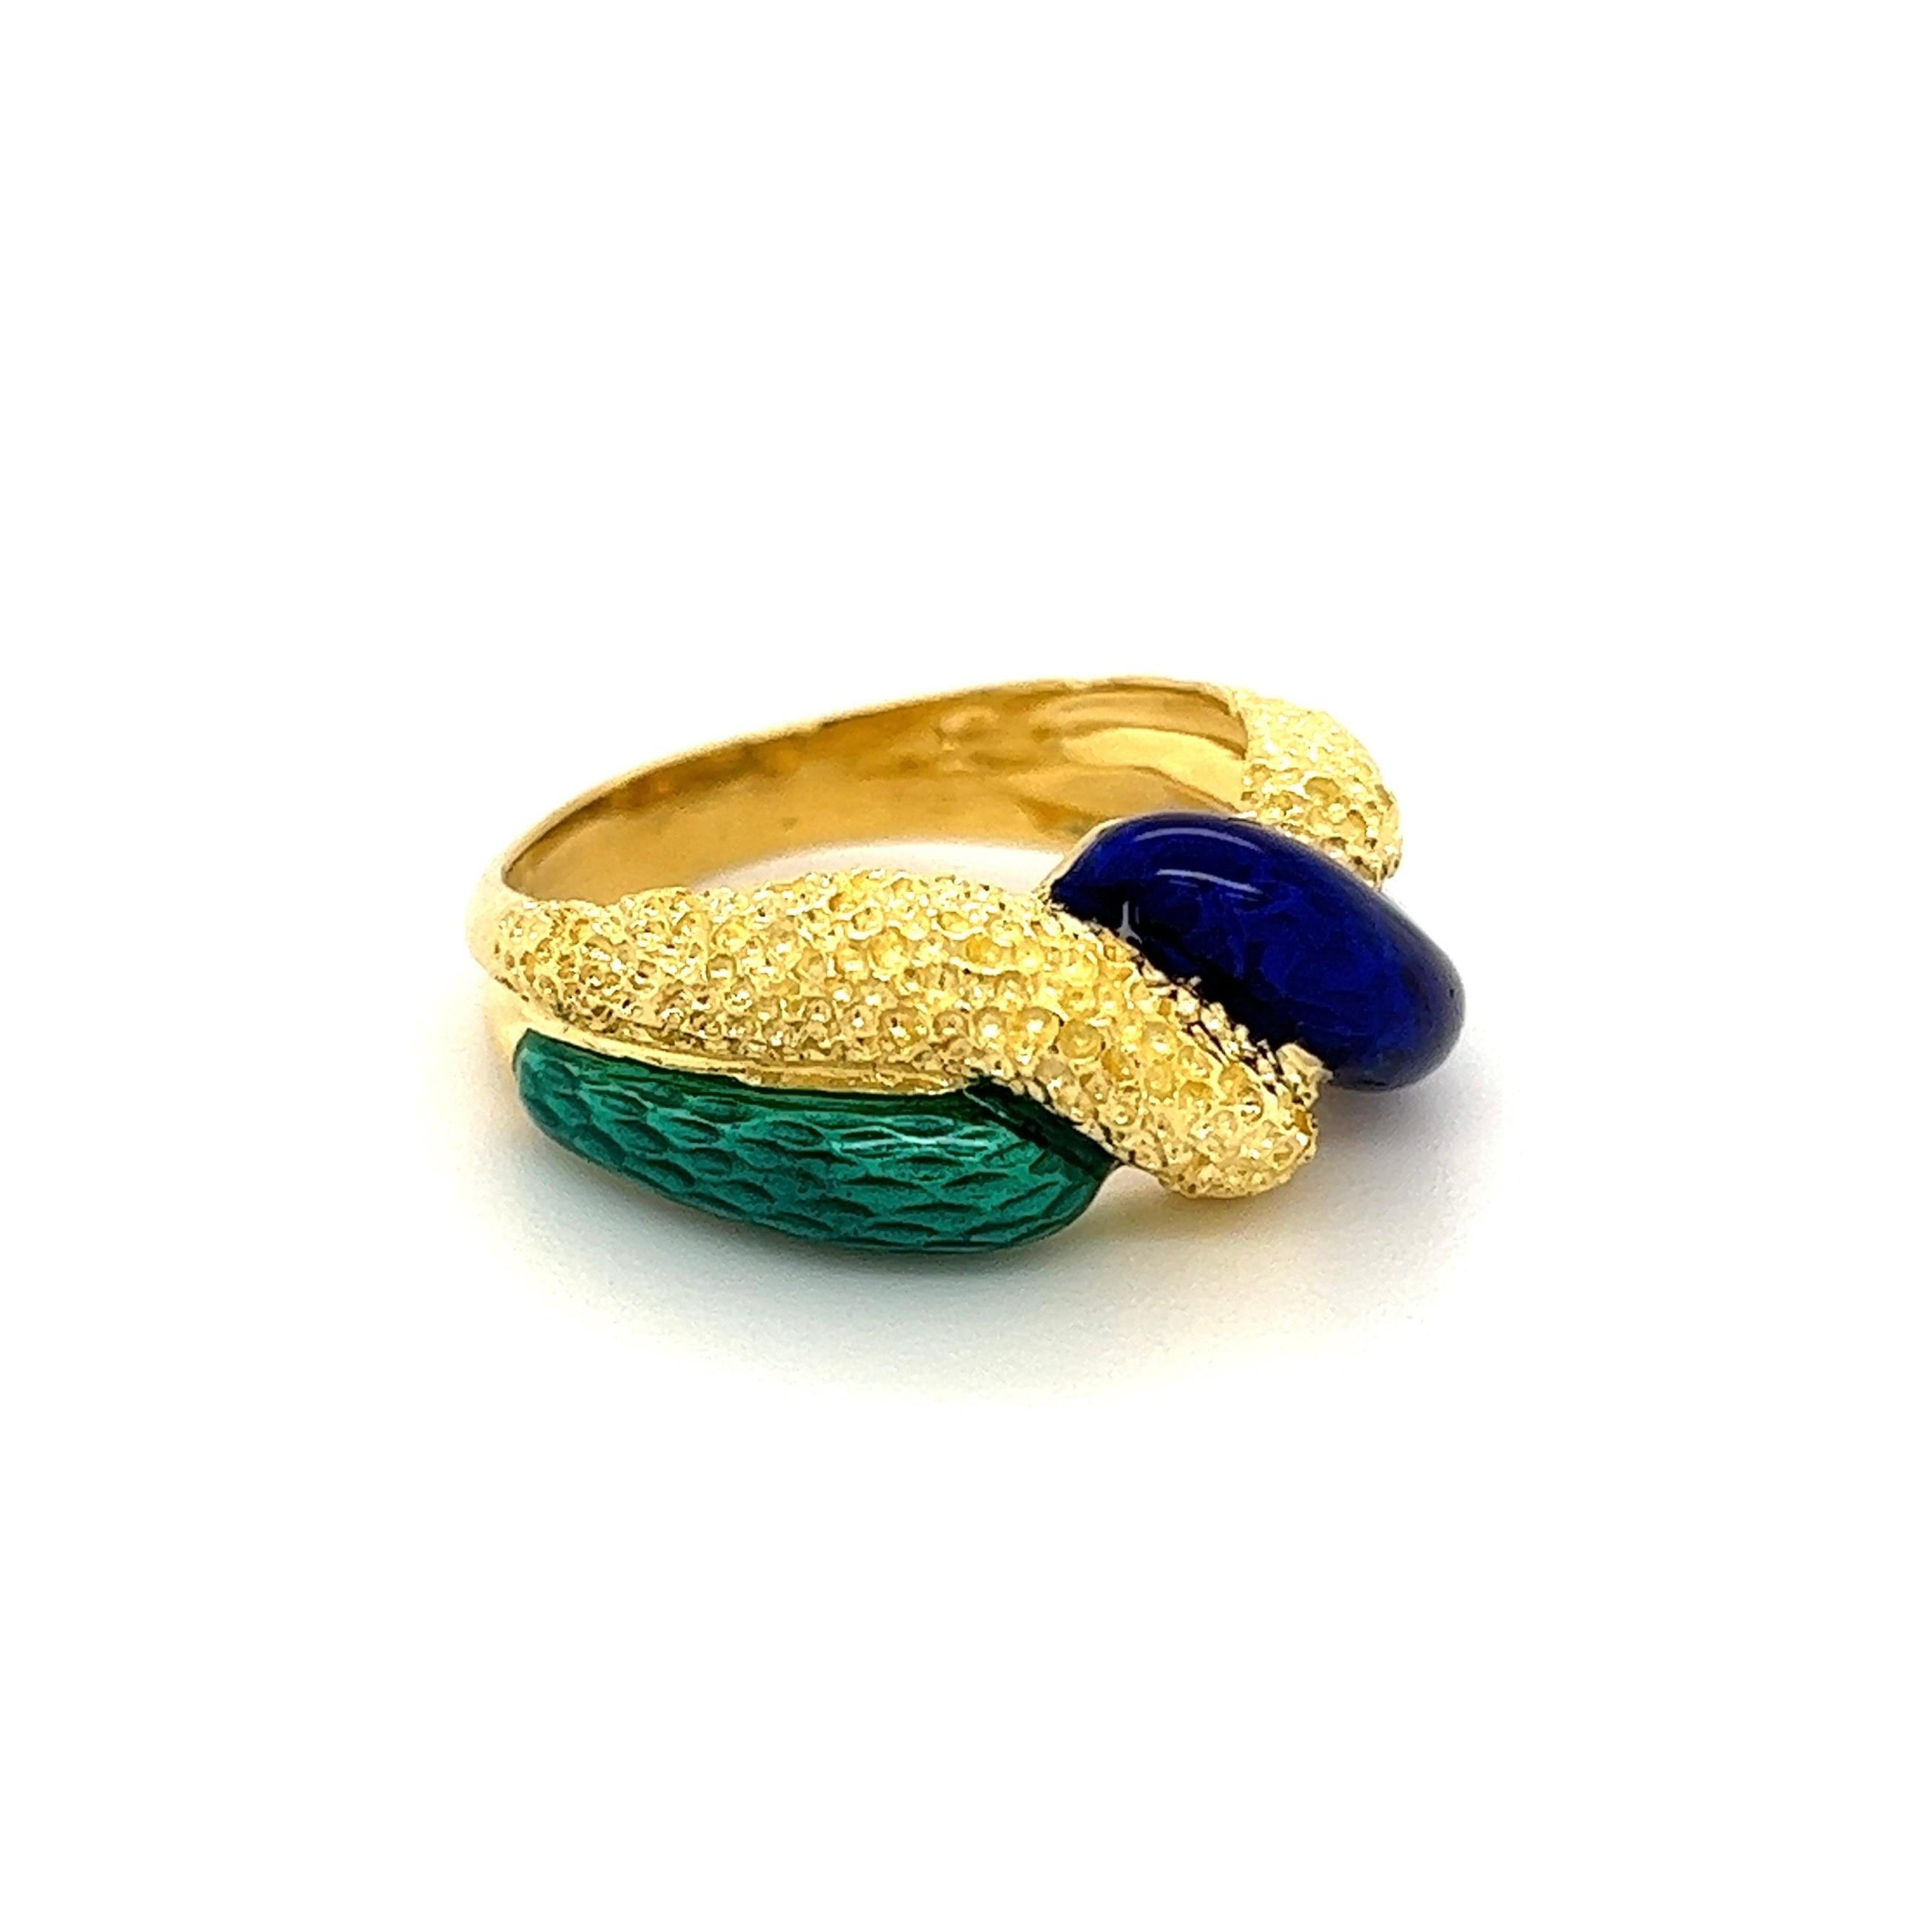 Simply Beautiful! Blue and Green Enamel Gold Twisted Ring Band Ring. Diamonds, Hand crafted in 18 Karat Yellow Gold. Measuring approx. 0.96” l x 0.87” w x 0.37” h. Ring size 7.5. The ring epitomizes vintage charm, ideal worn alone or as a lovely